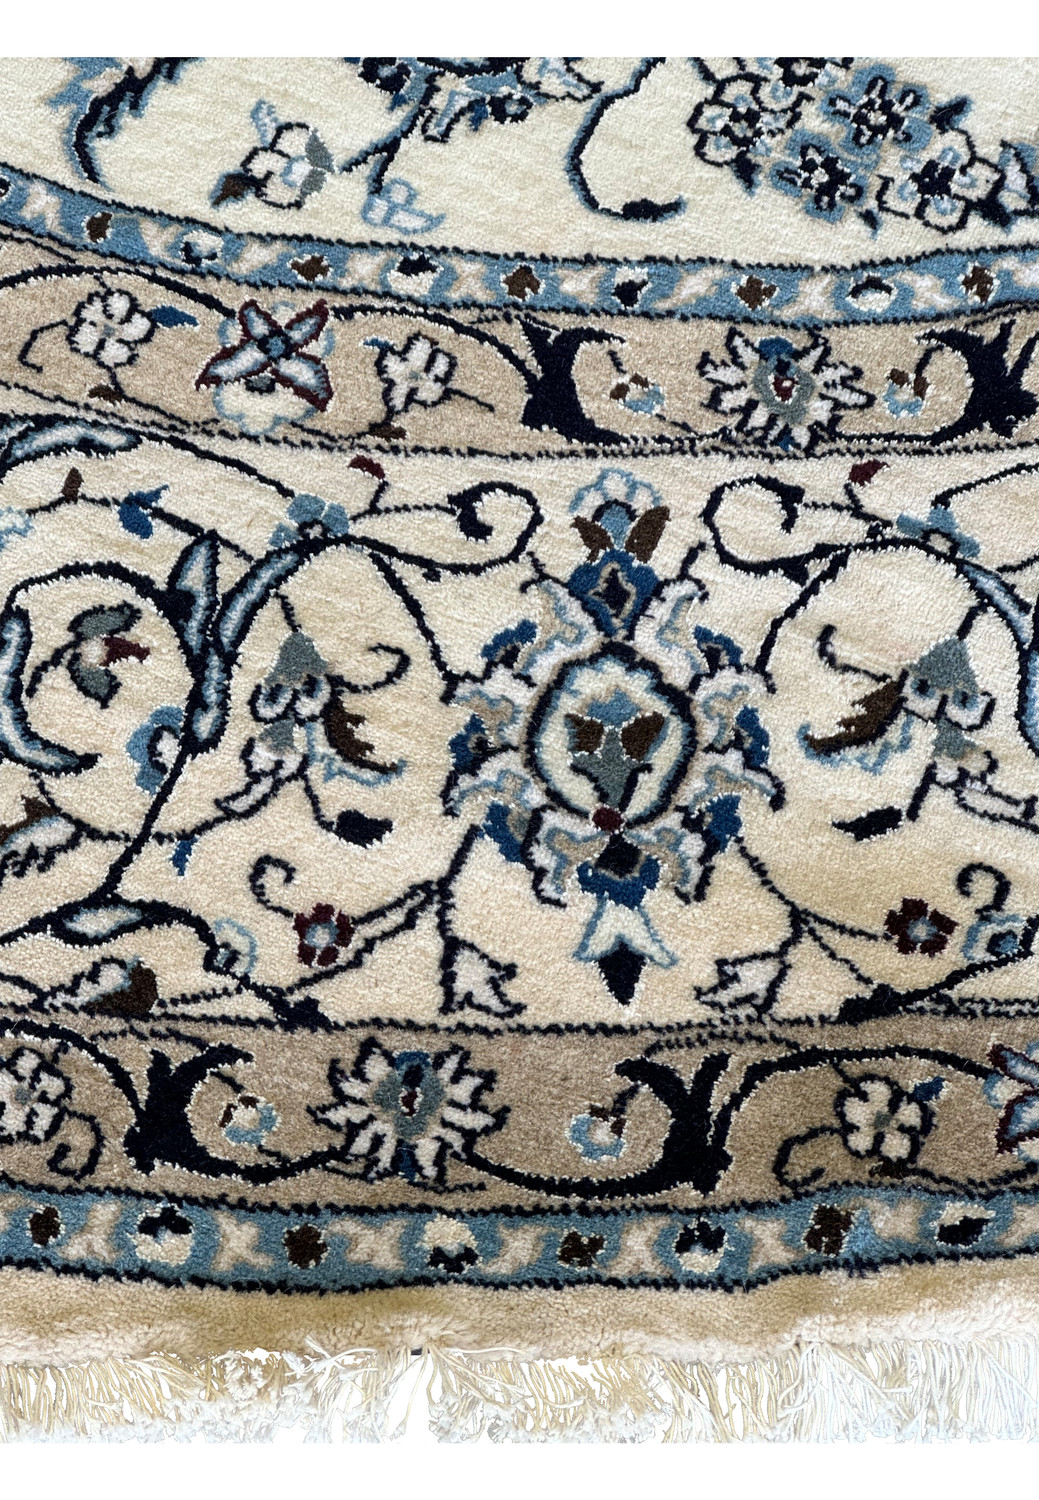 Handmade Persian Nain round rug with elaborate floral and vine motifs